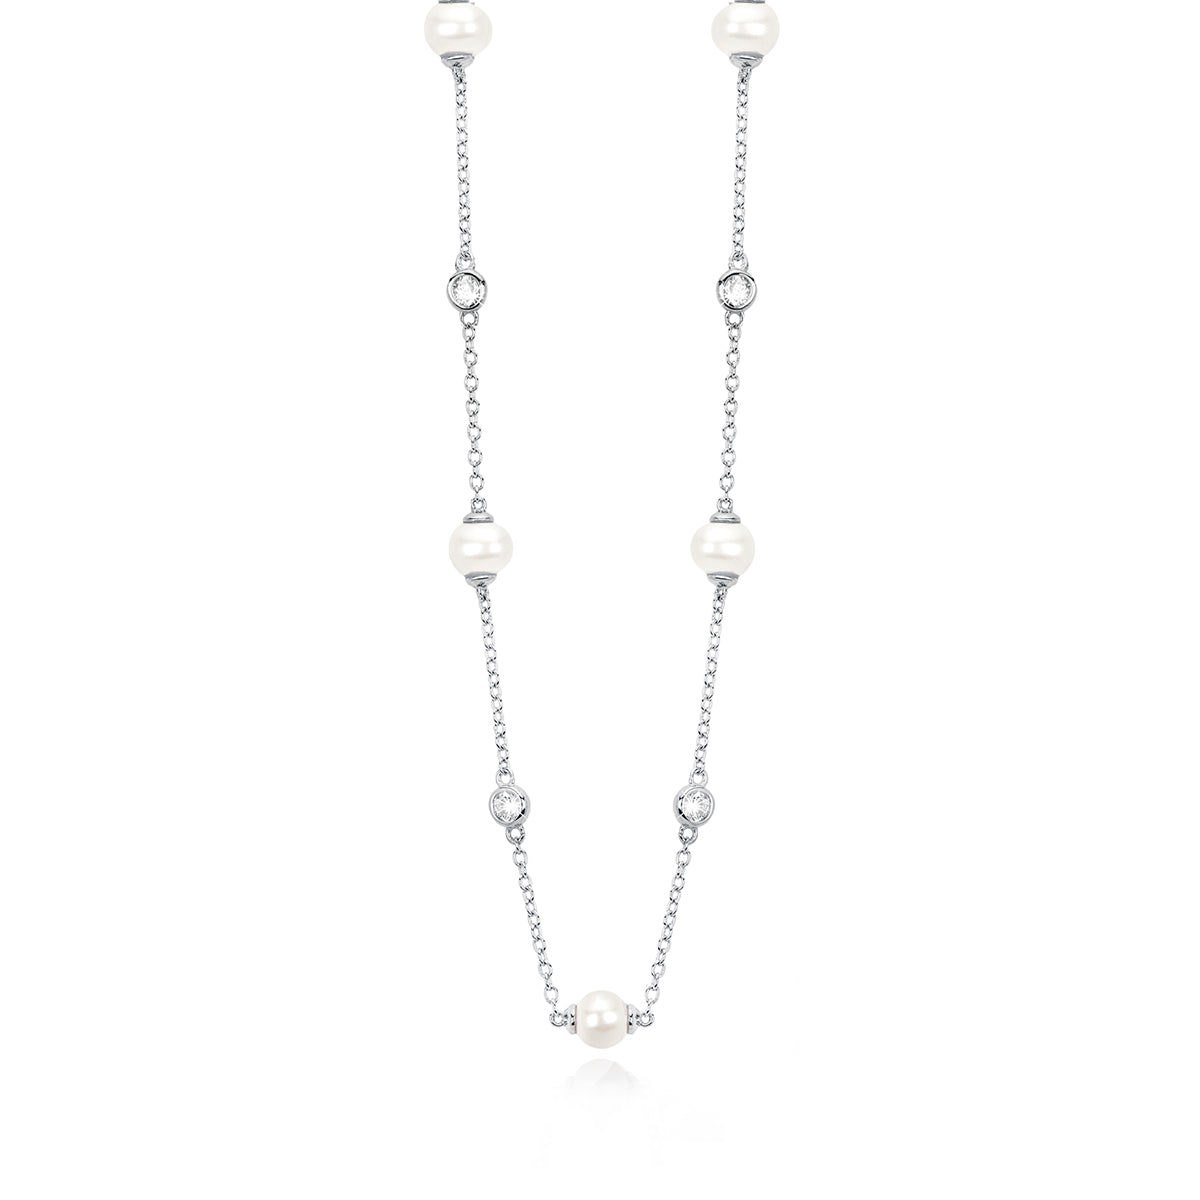 MABINA - Pearls and Zircons Necklace